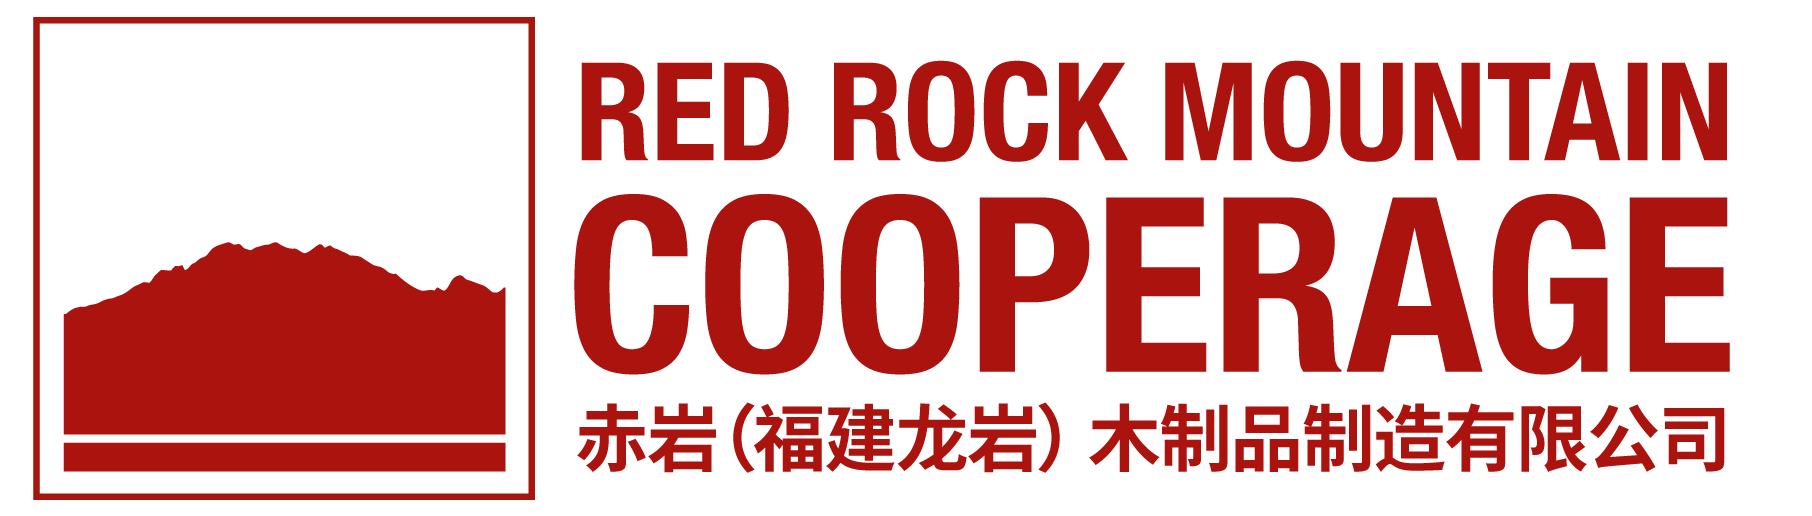 Red Rock Mountain Cooperage